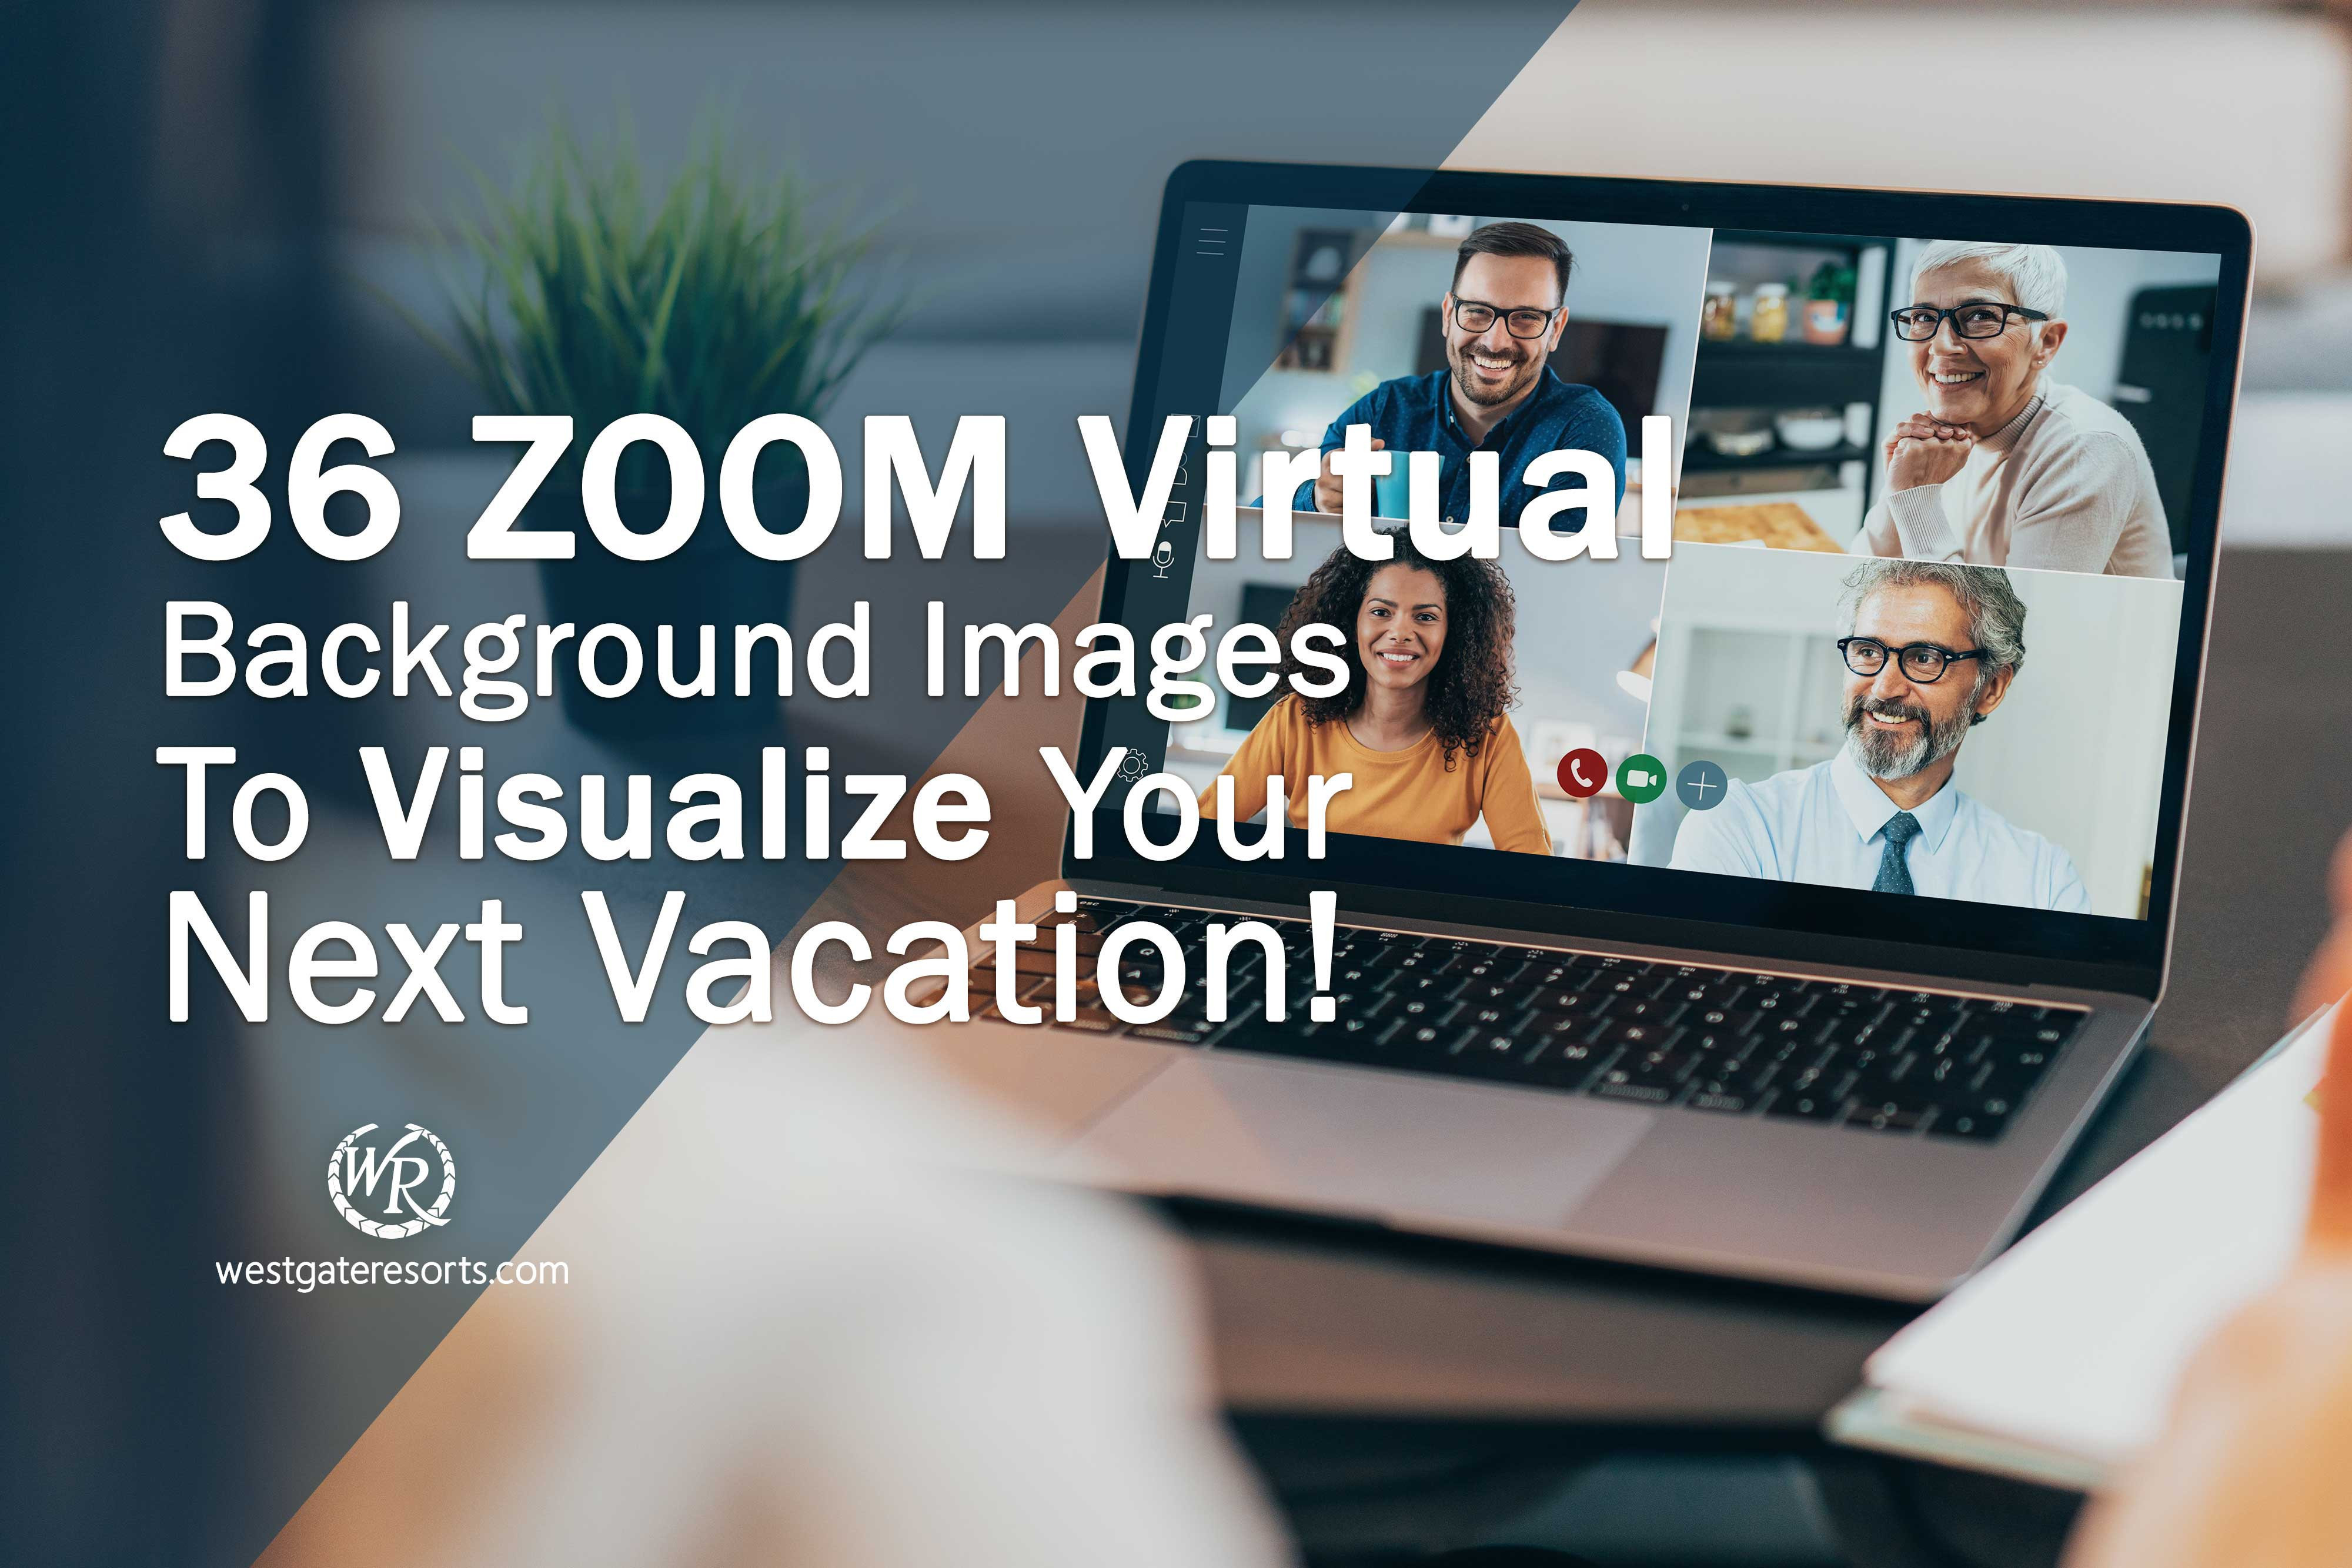 36 ZOOM Virtual Background Images to Visualize Your Next Vacation!